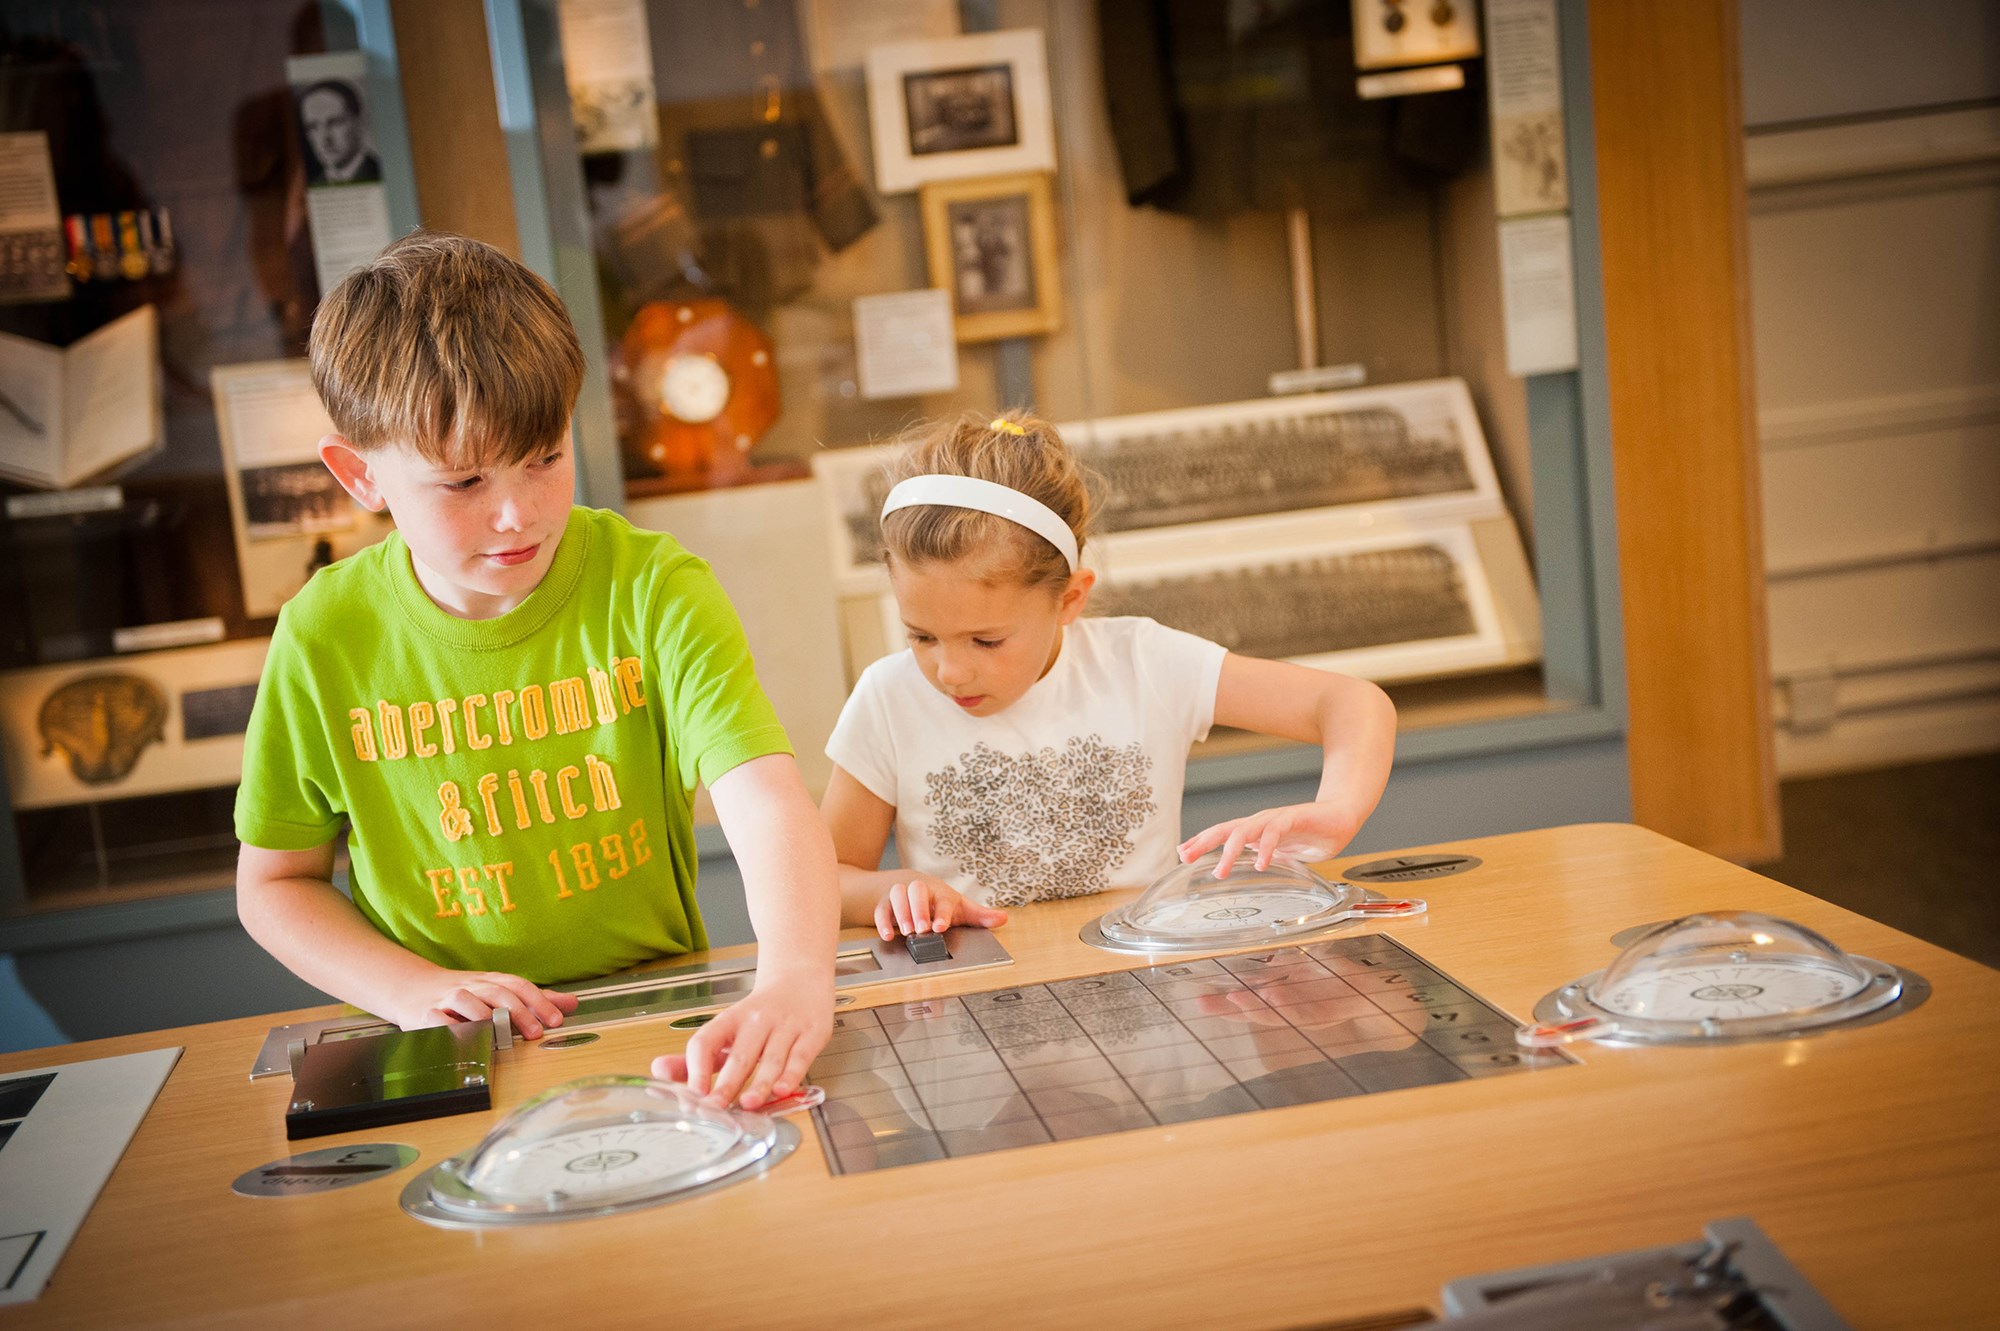 Two children interacting with a navigation display at the National Museum of Flight